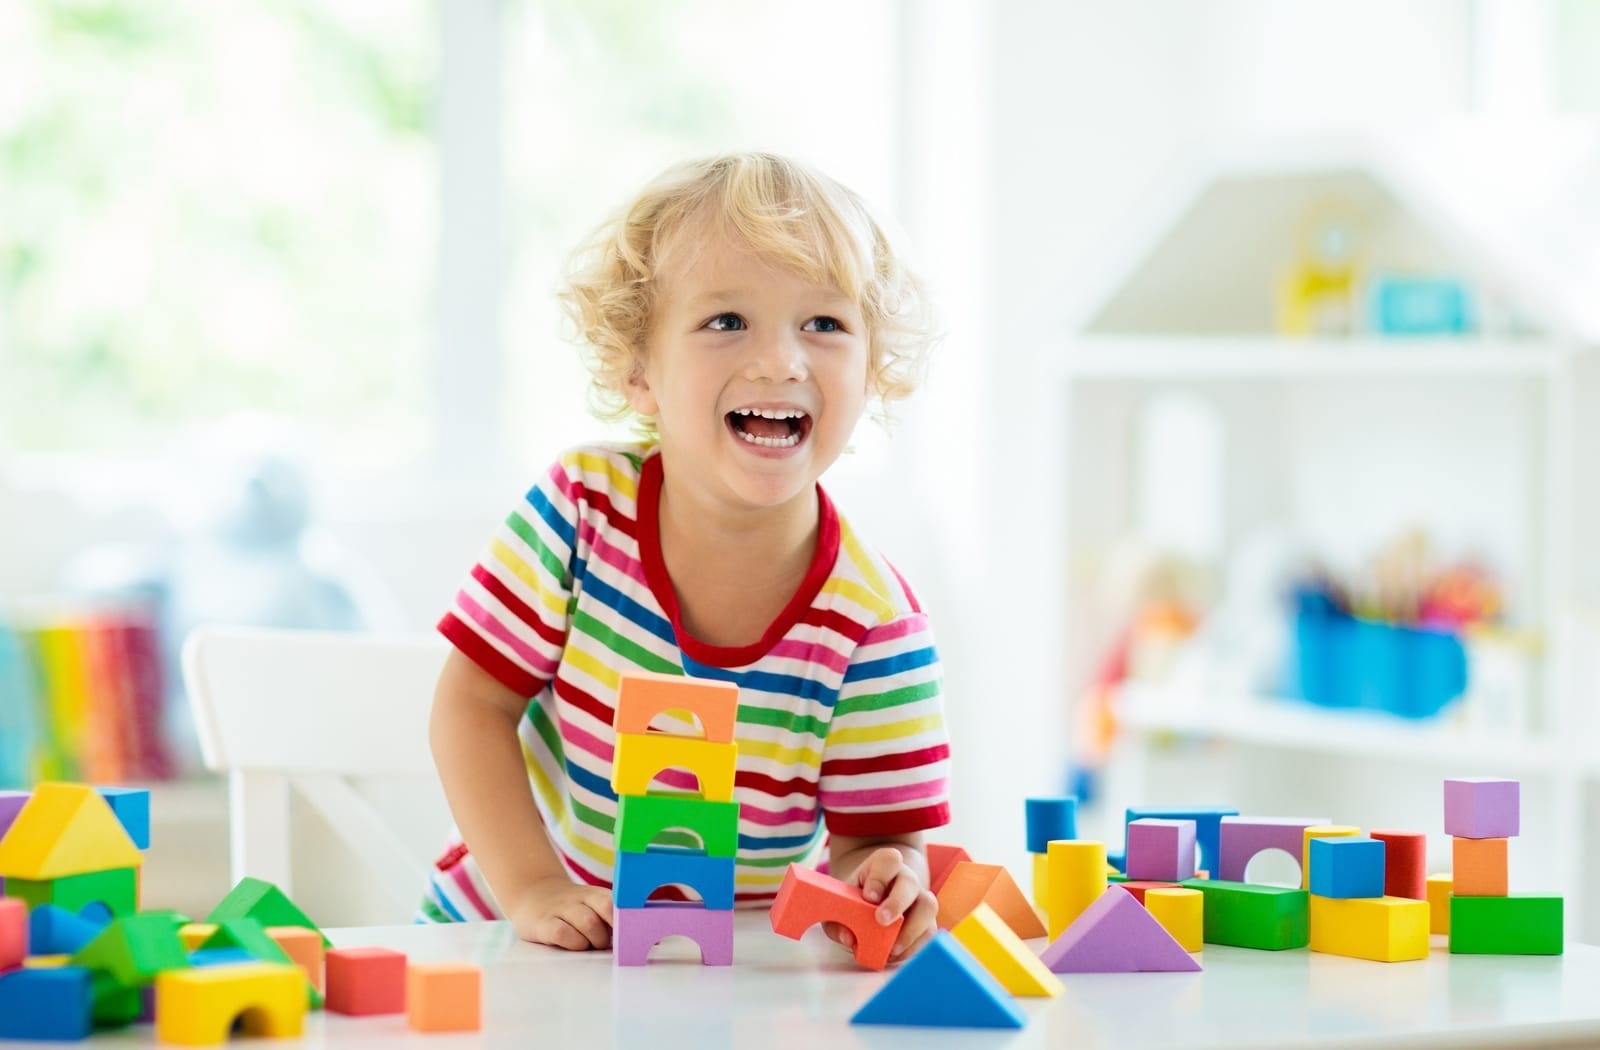 A young child with a colourful shirt smiling, having fun and playing with toys at a daycare